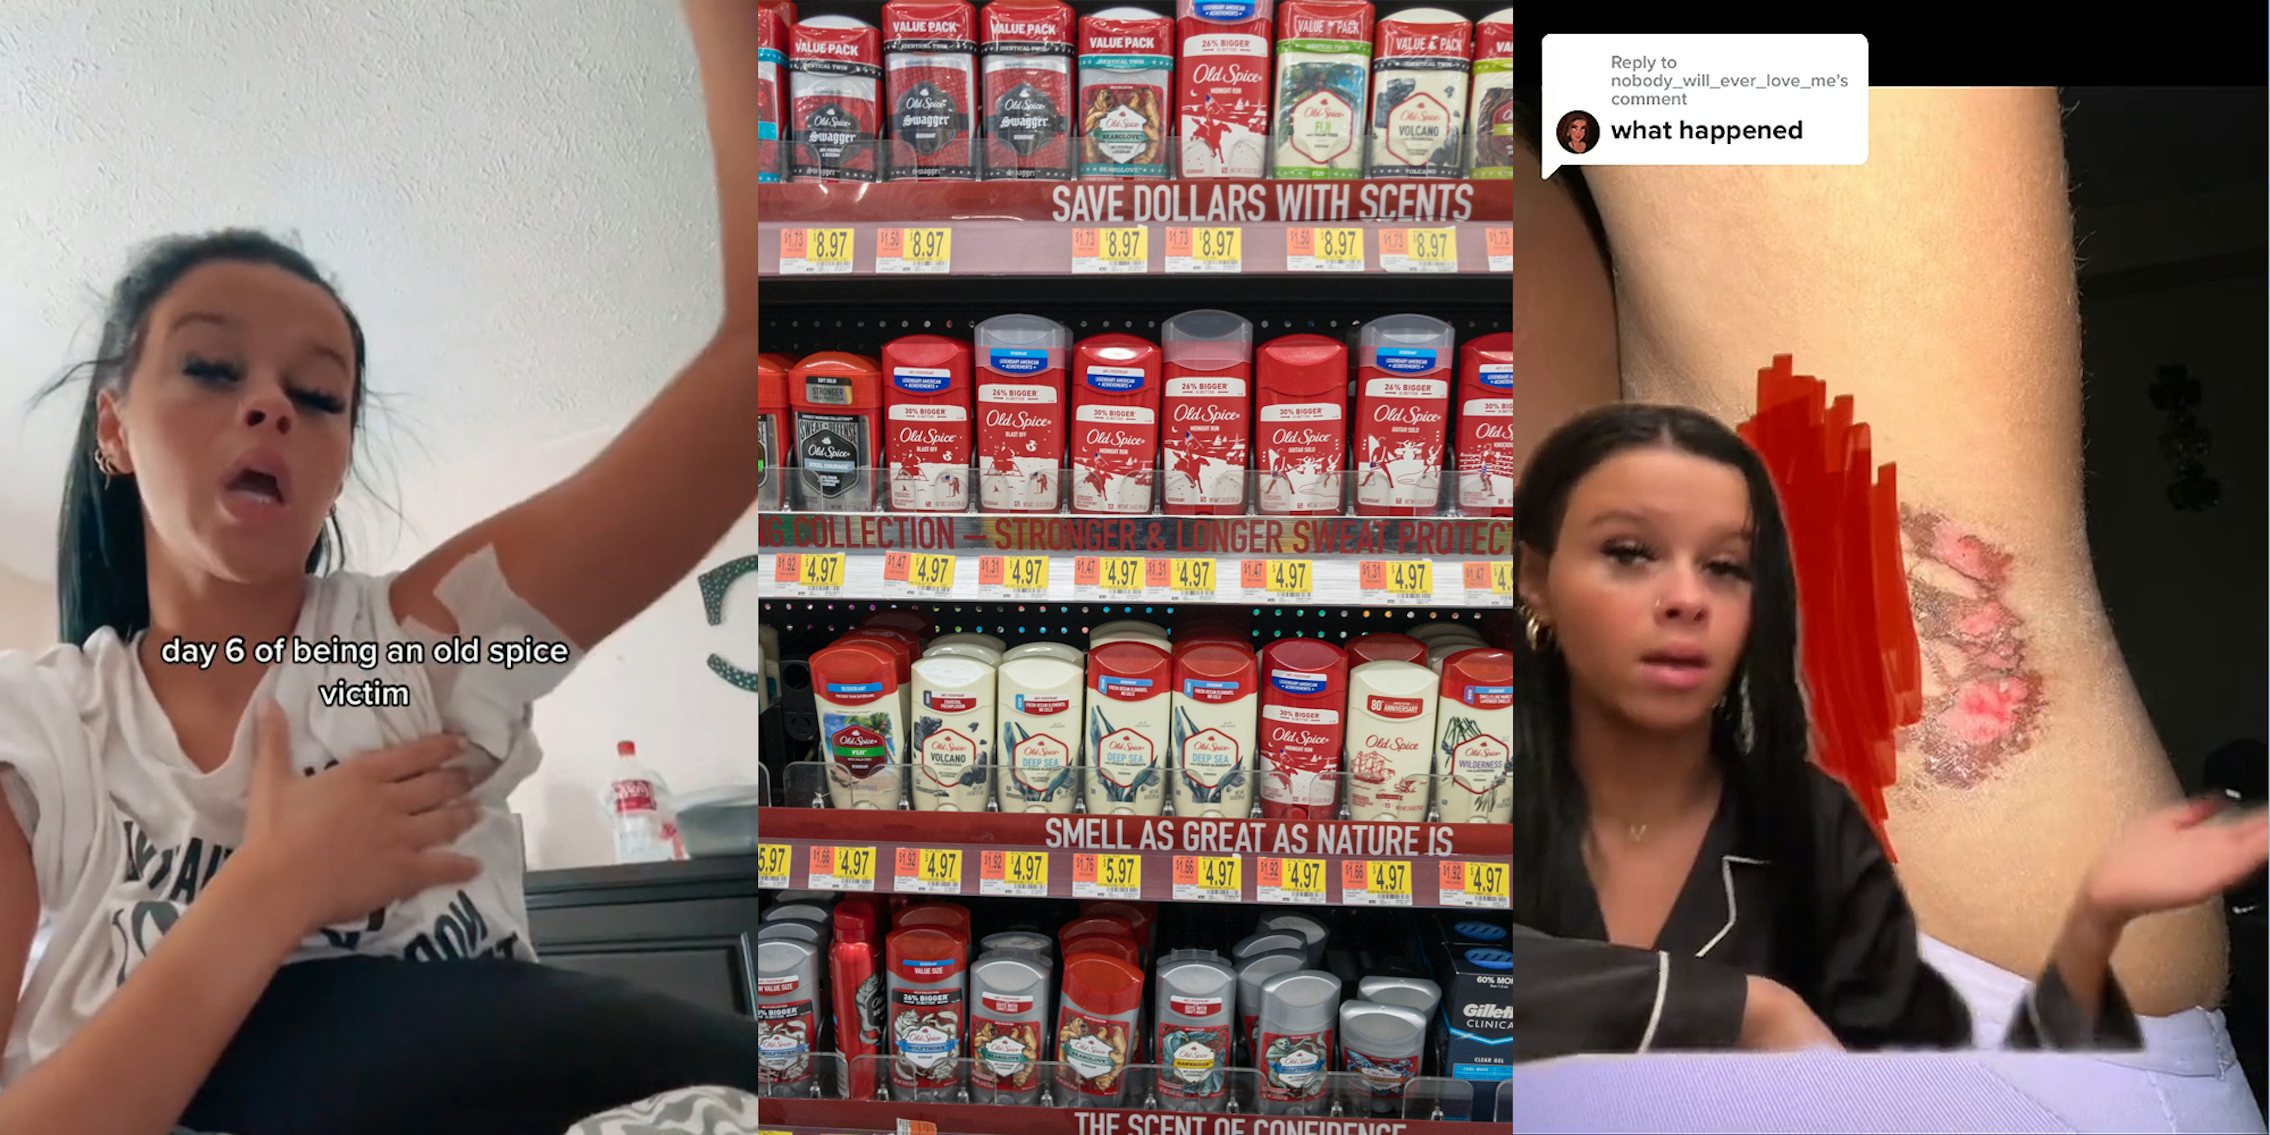 person holding up arm revealing bandage in armpit with caption 'day 6 of being an old spice victim' (l) Old Spice deodorants on shelf at store (c) person greenscreen TikTok over image of chemical burn in armpit with caption 'what happened' (r)